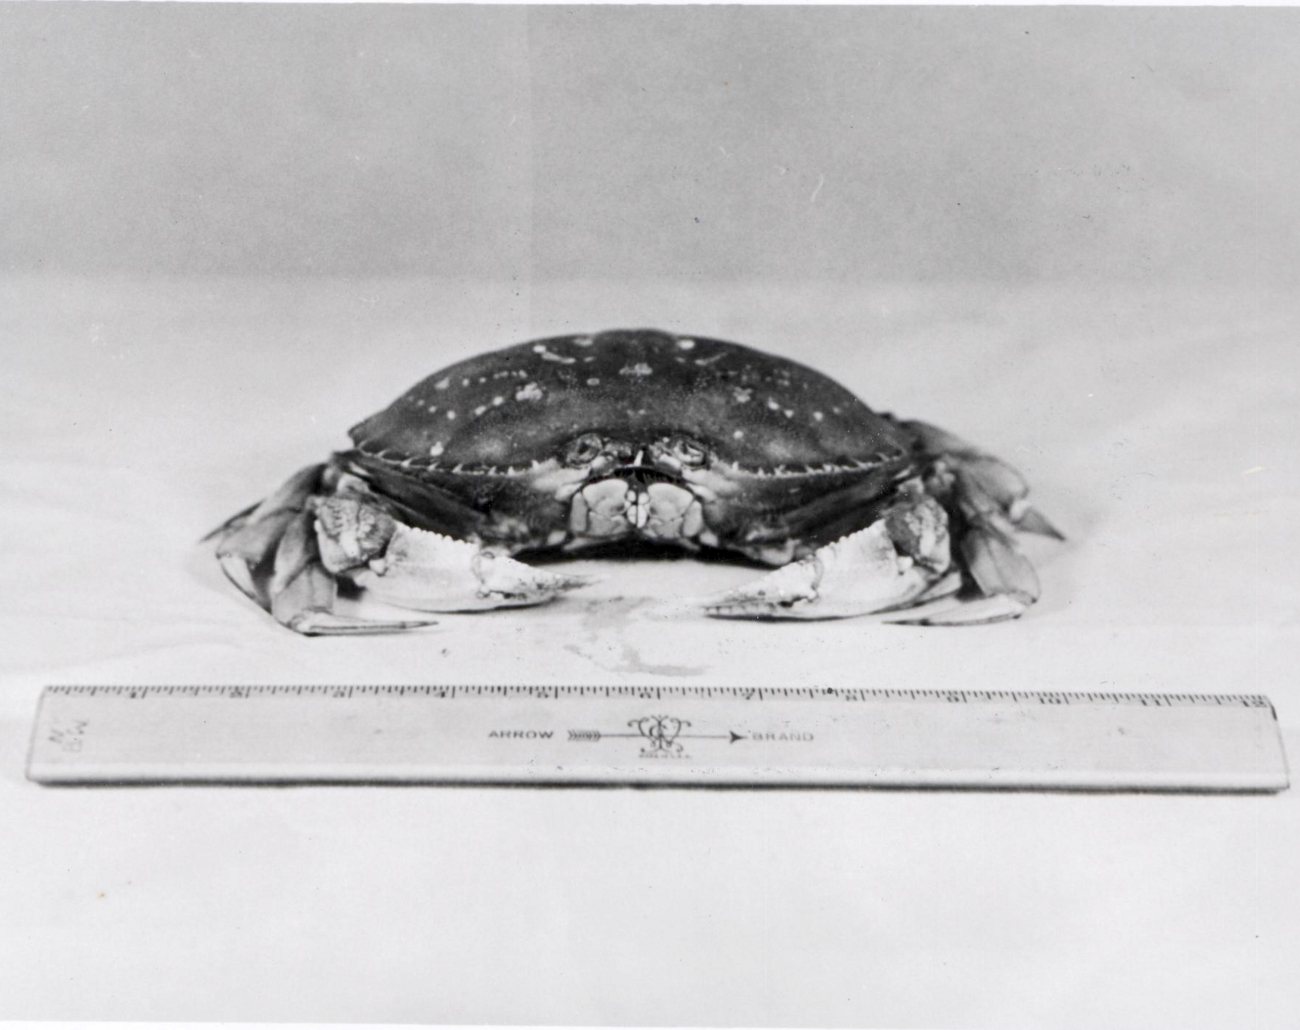 Female dungeness crab